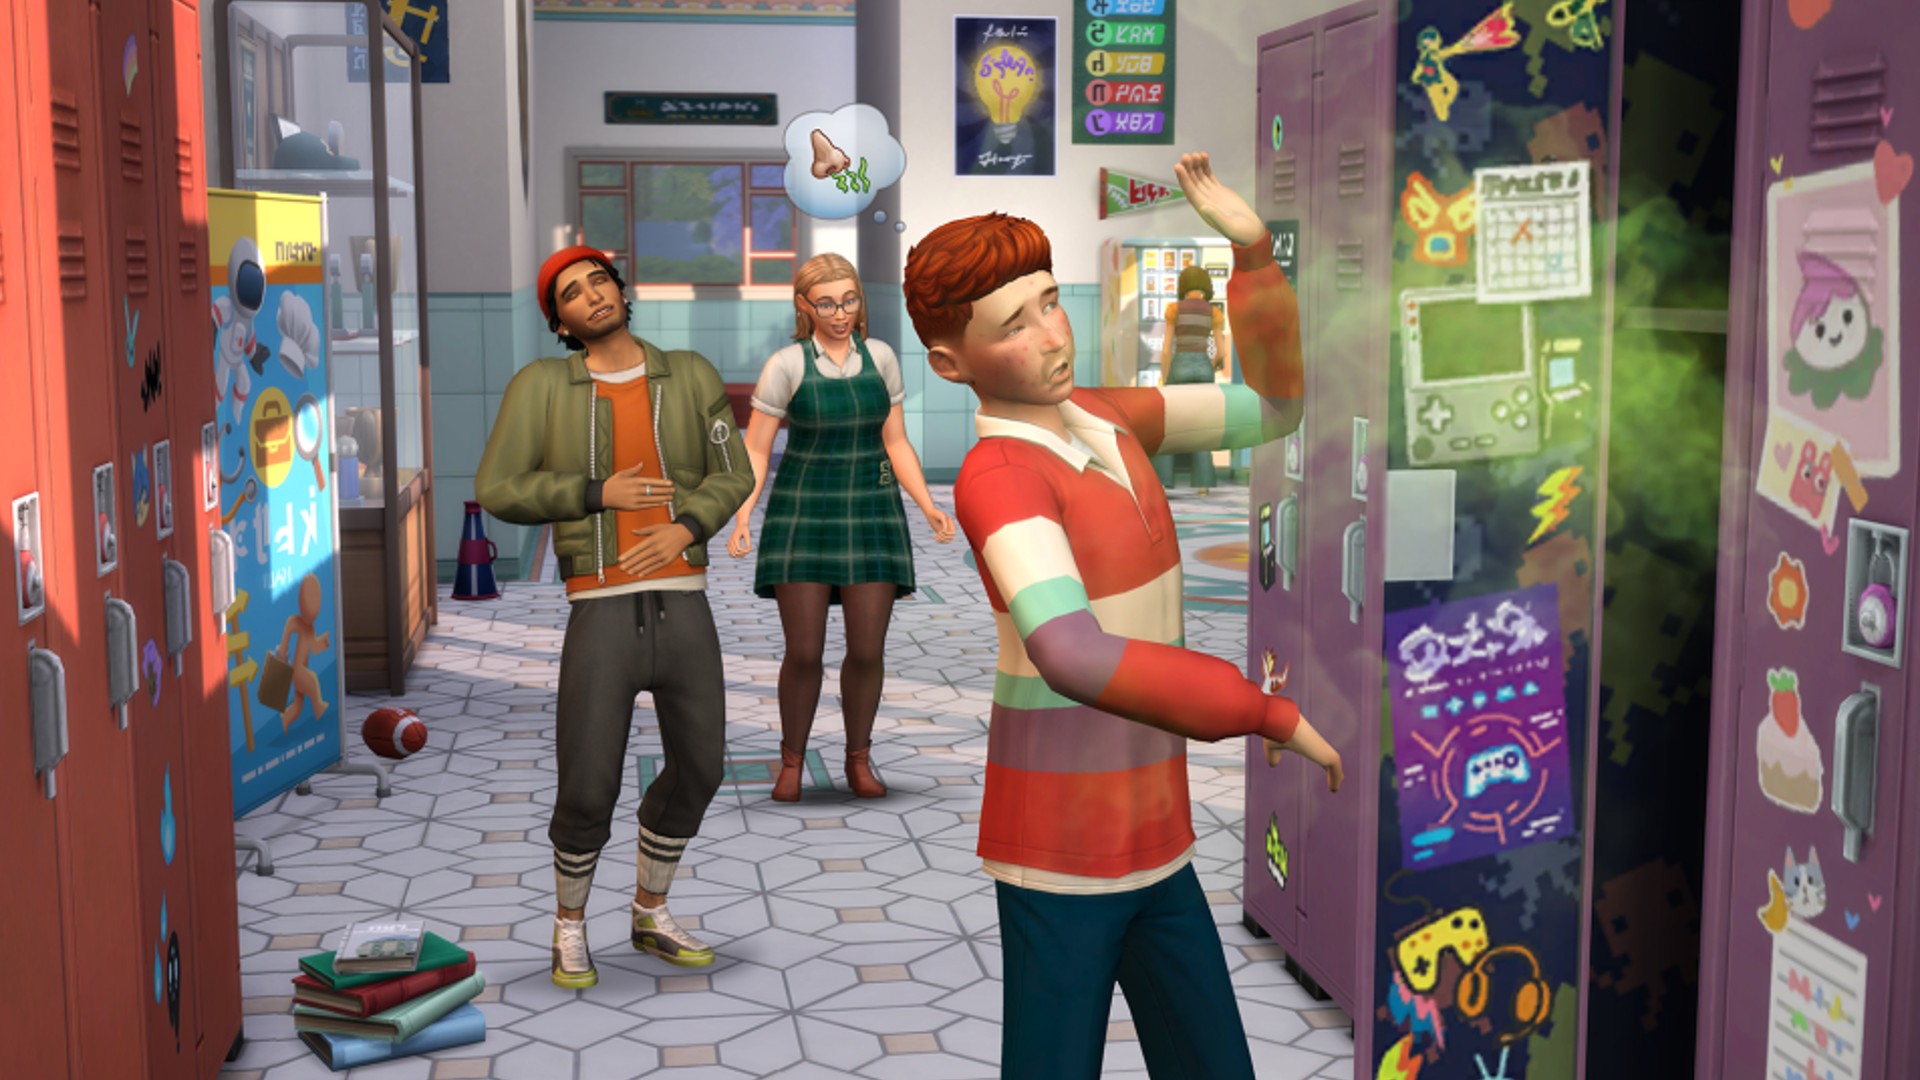 Sims 4 players are split over the new free-to-play model | GamesRadar+